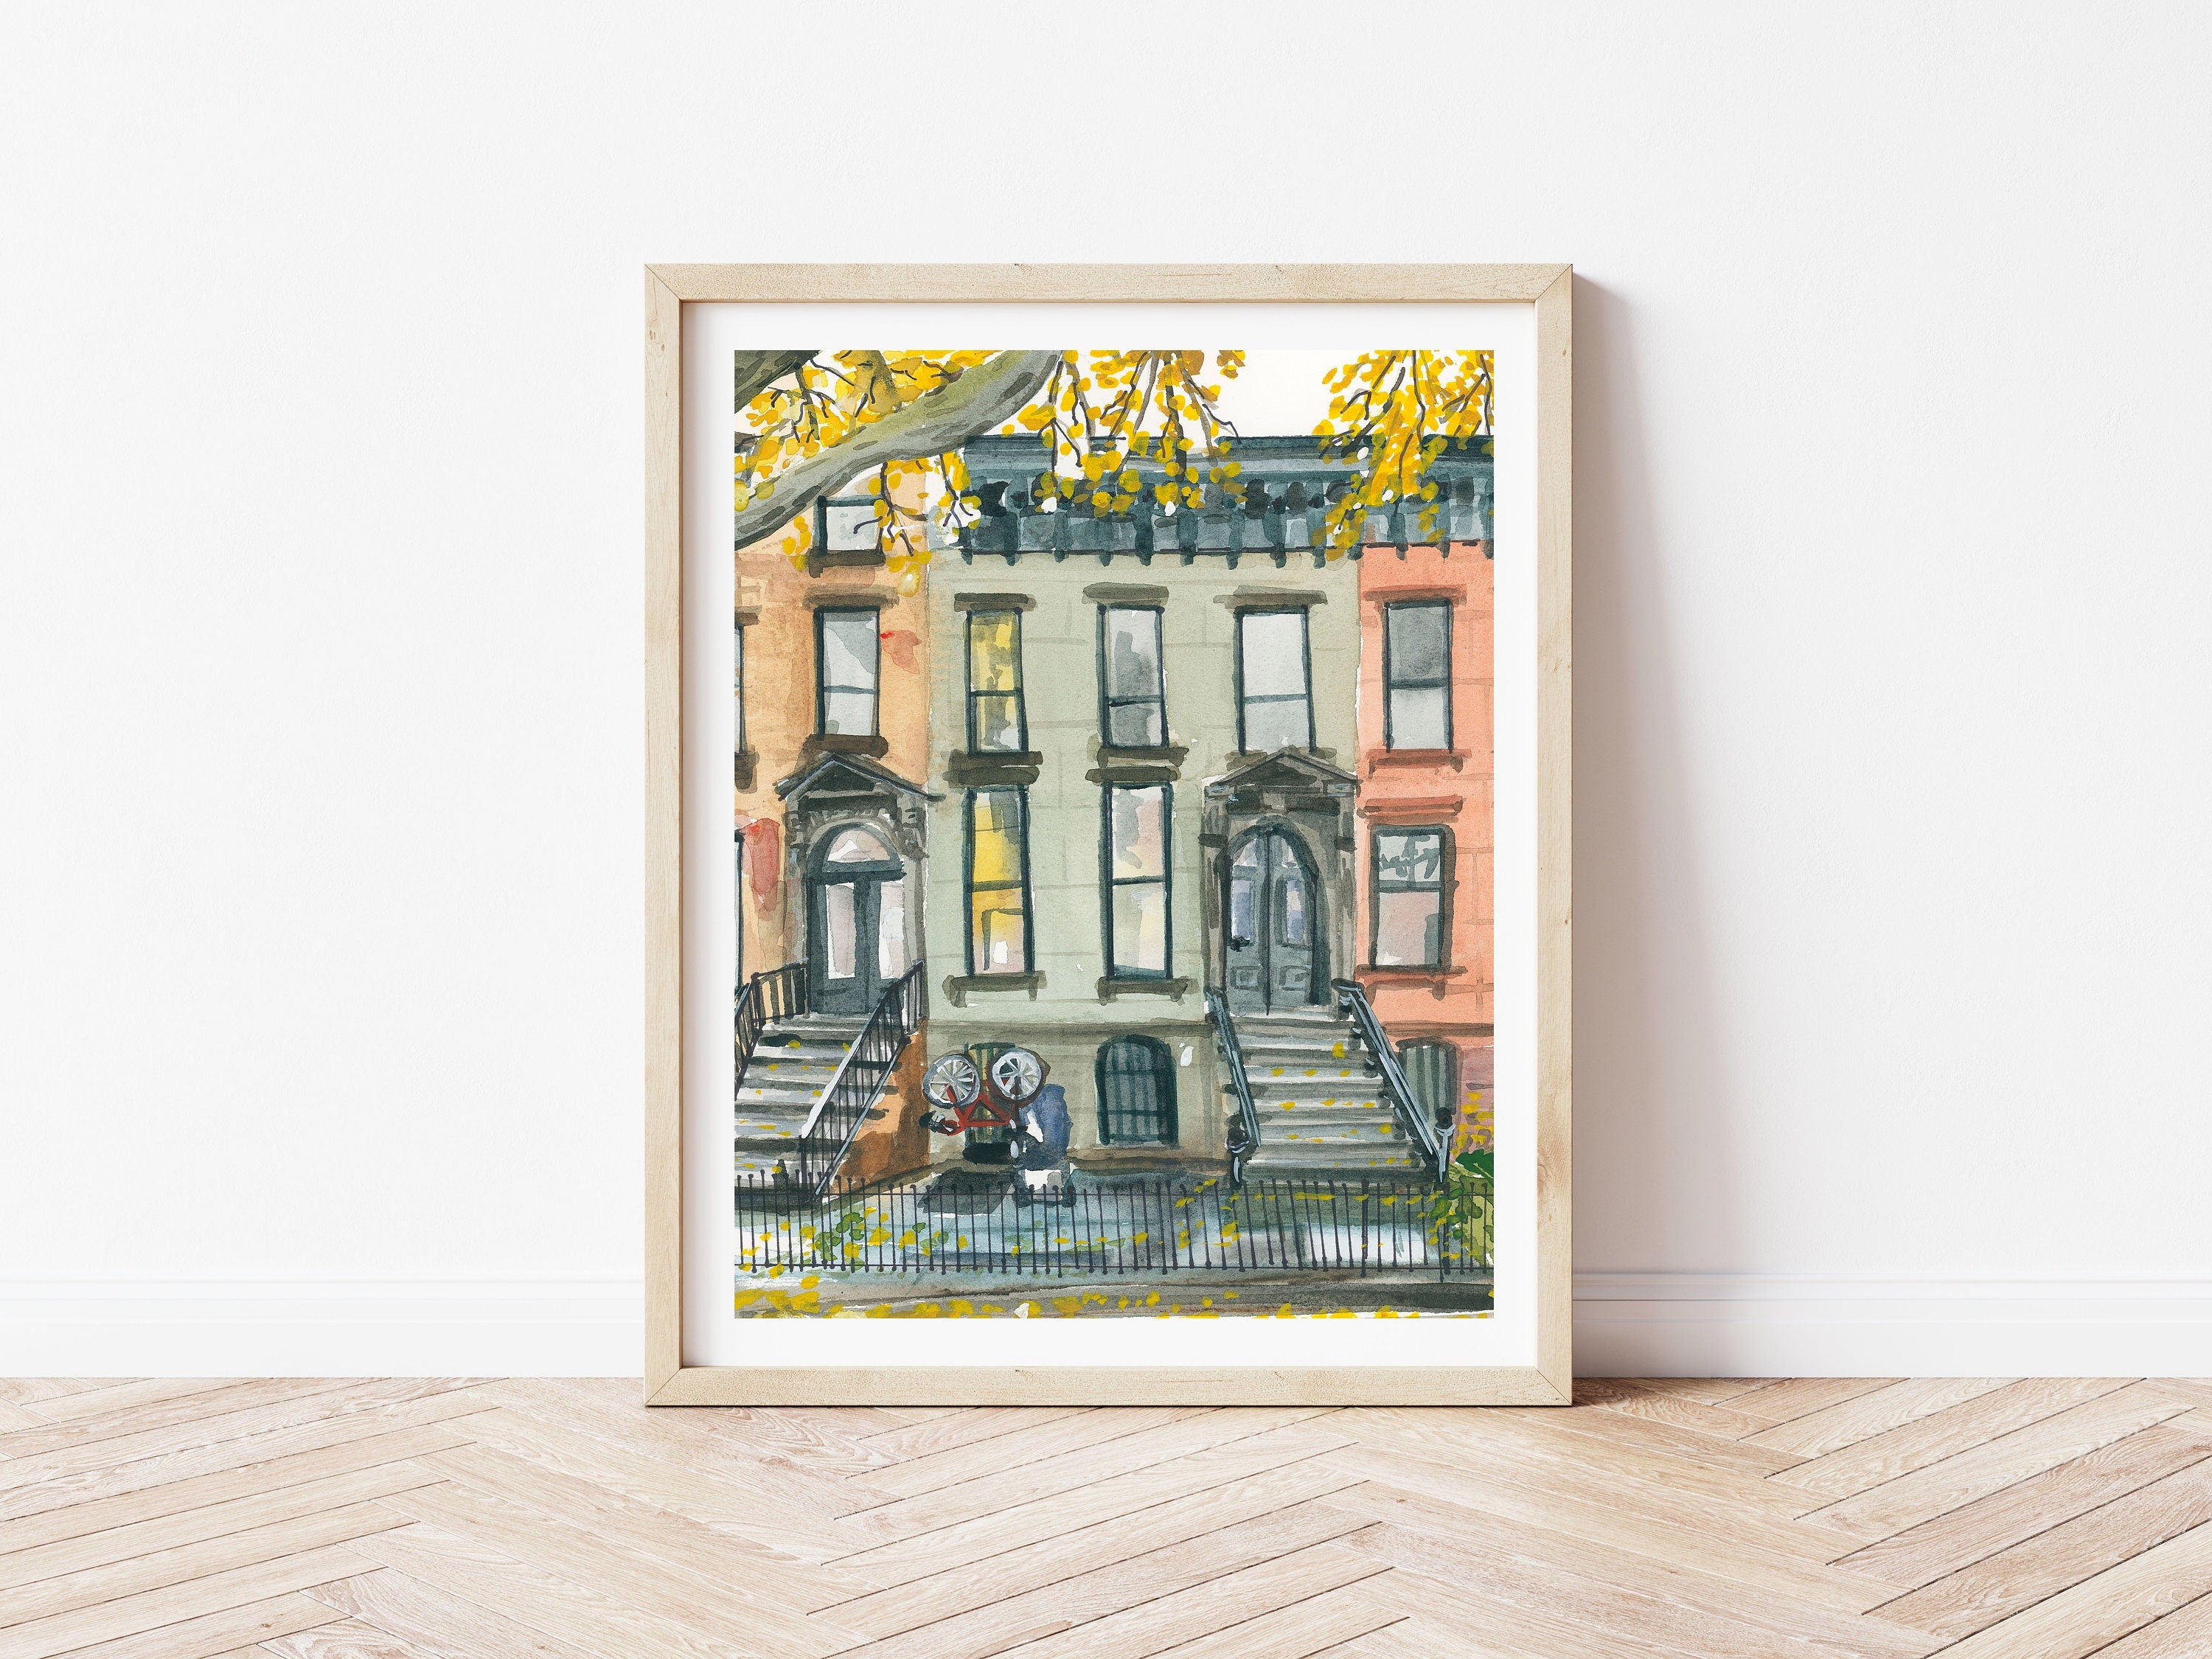 Montreal brownstone print of painting by Medjool Studio. Print of original gouache painting of a brownstone building in Montreal, Canada.